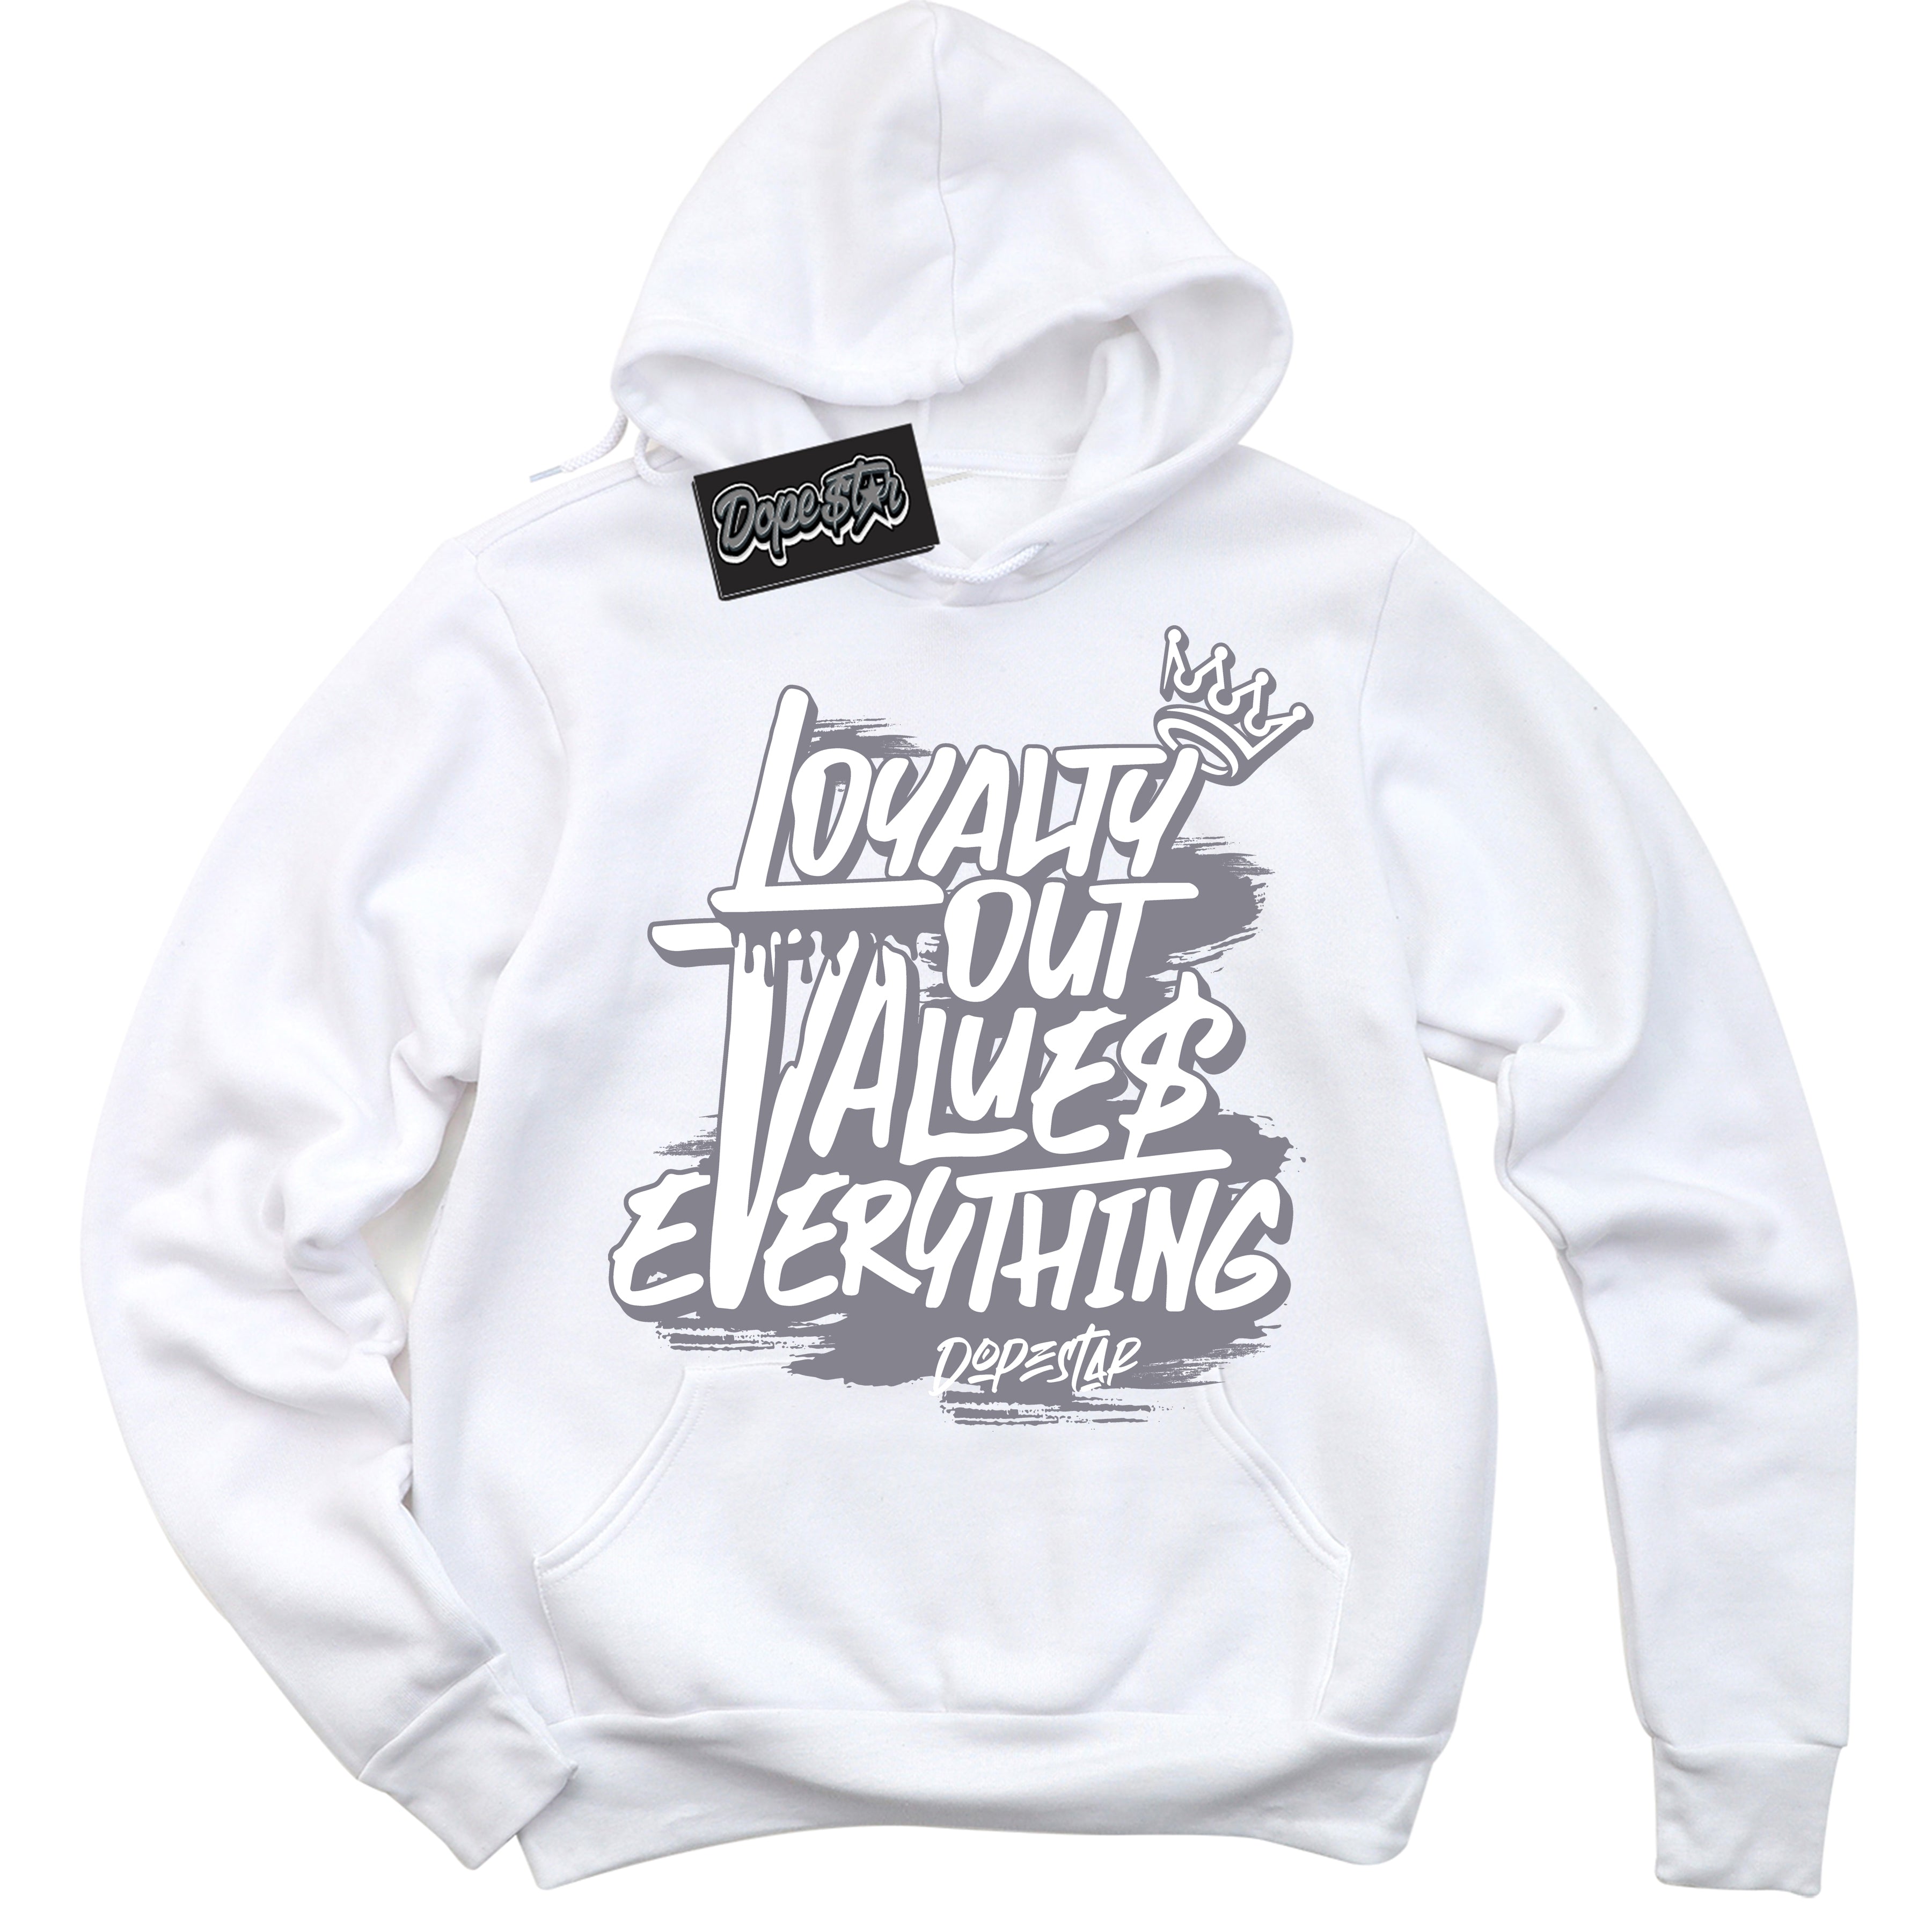 Cool White Hoodie with “ Loyalty Out Values Everything ”  design that Perfectly Matches  Vintage Stealth Grey 1s Sneakers.